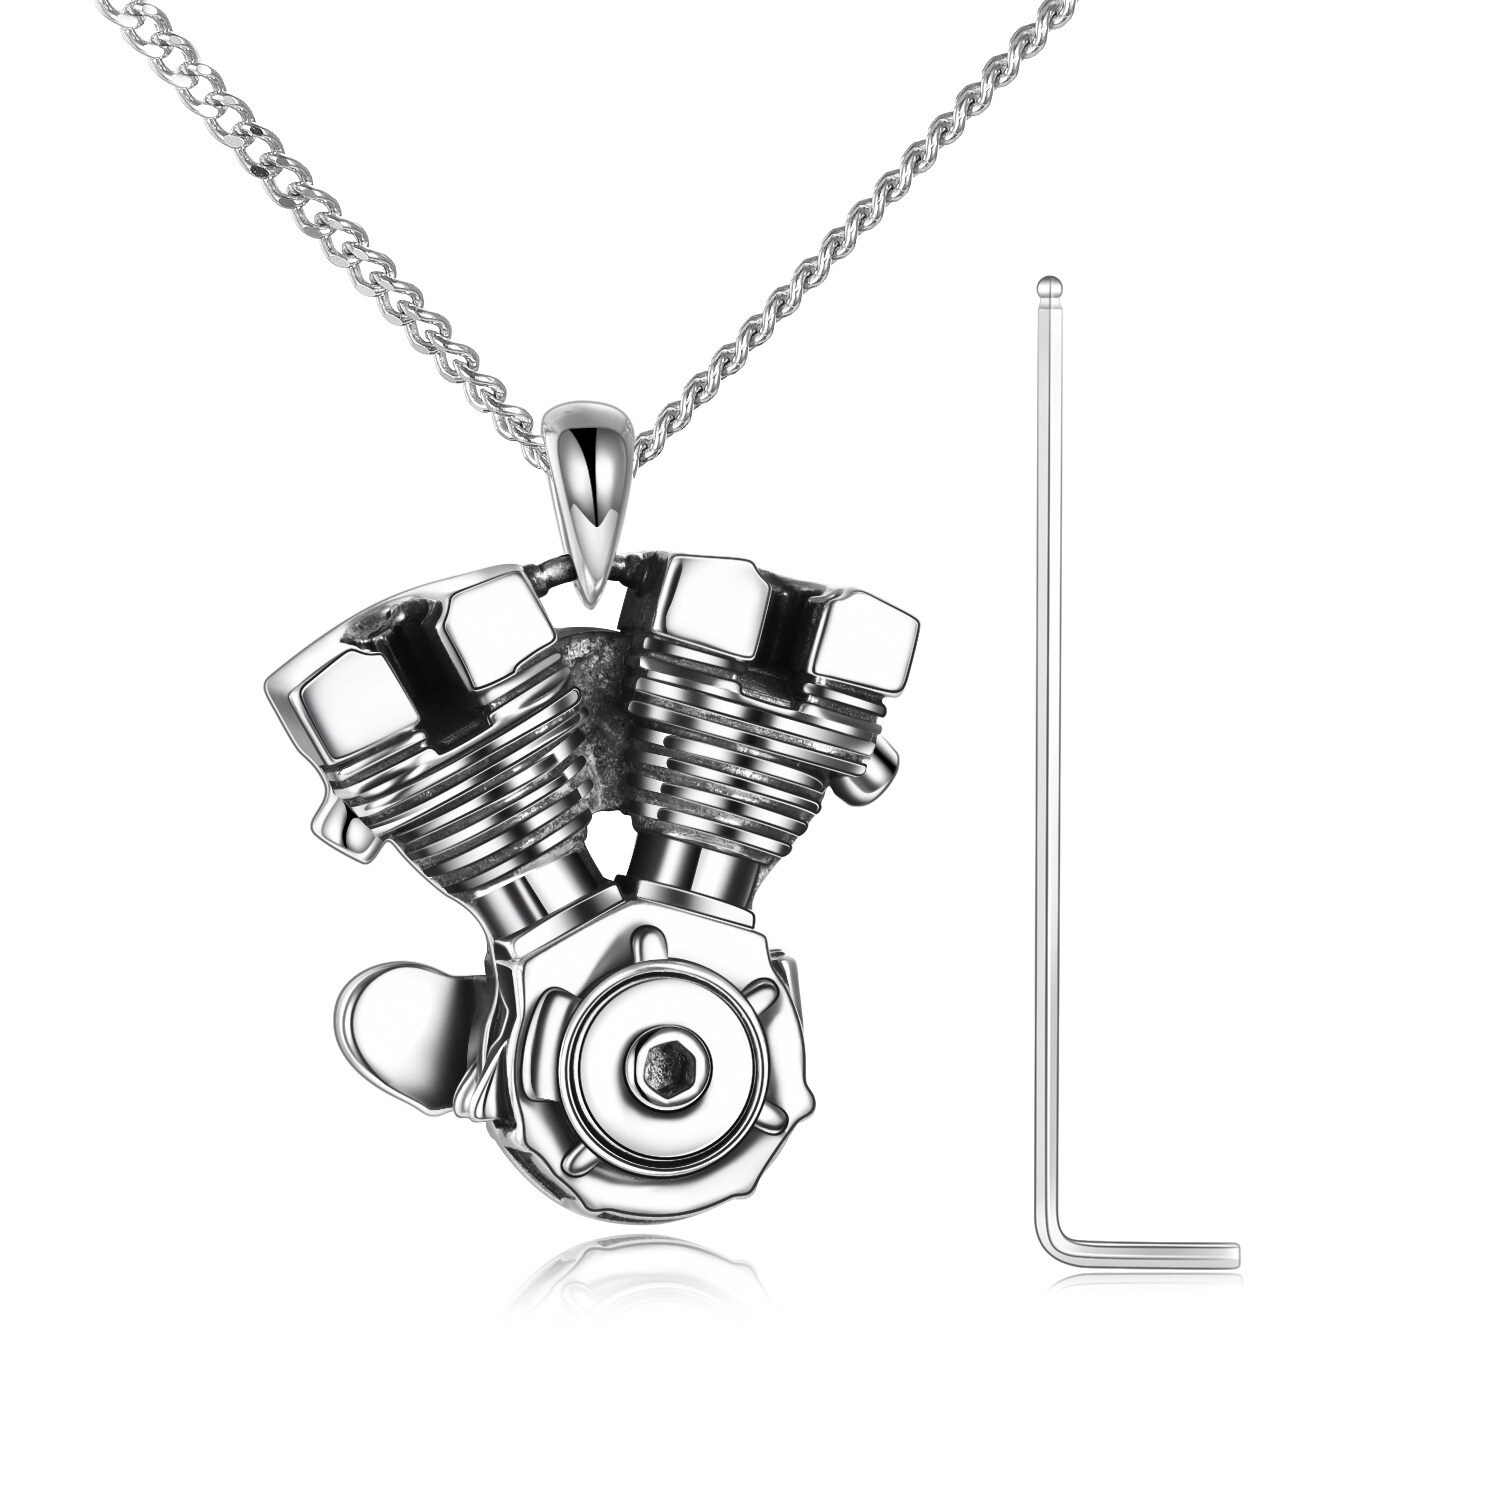 PATISORNA 925 Sterling Silver Cremation Urn Pendant Necklace for Ashes  Teardrop Memorial Heart CZ Keepsake Jewelry for Women : Amazon.ca:  Clothing, Shoes & Accessories